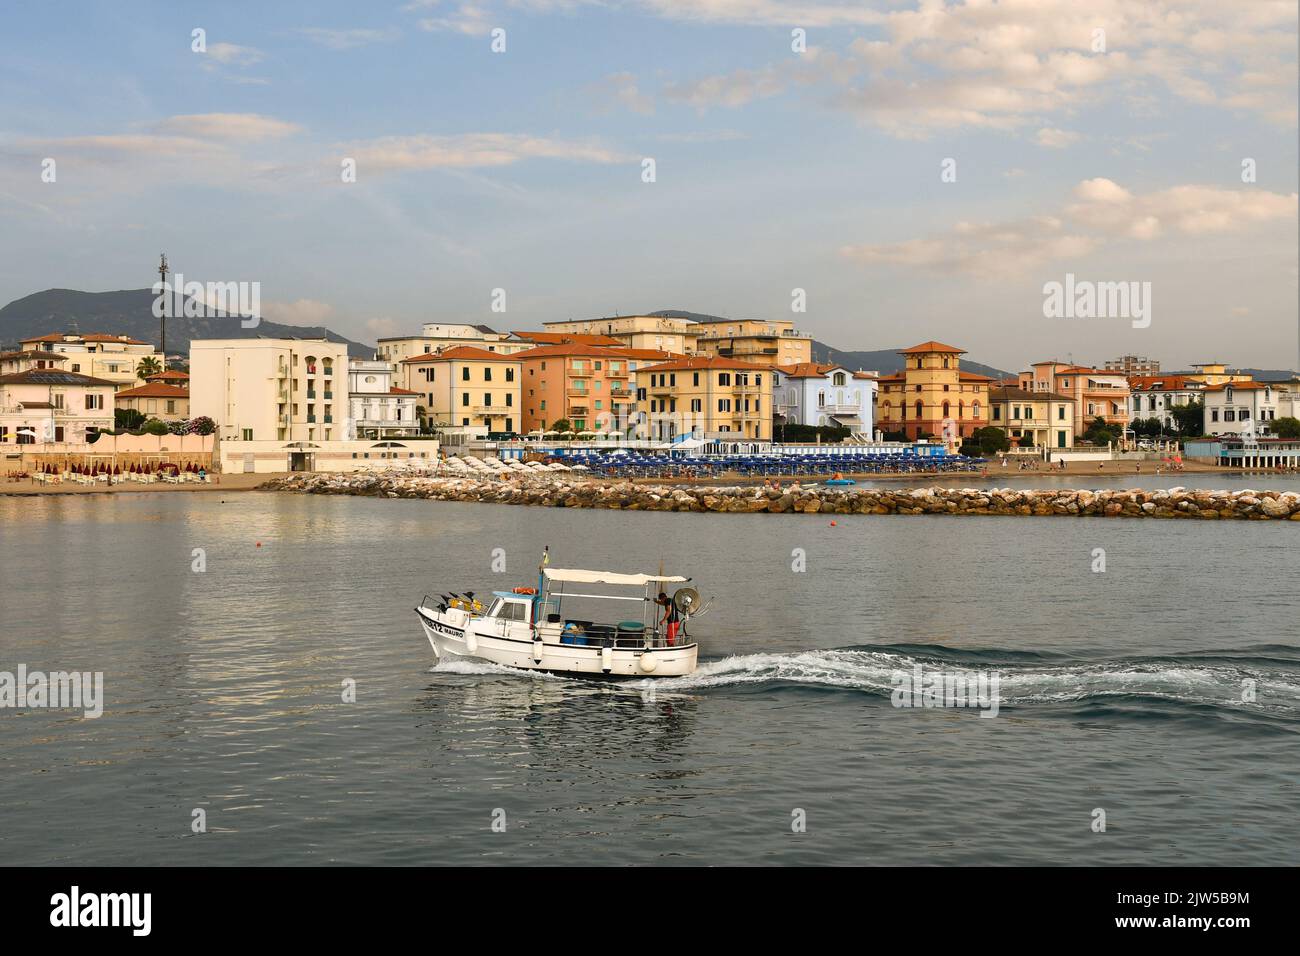 A small fishing boat entering in the harbor of San Vincenzo at sunset, Livorno, Tuscany, Italy Stock Photo